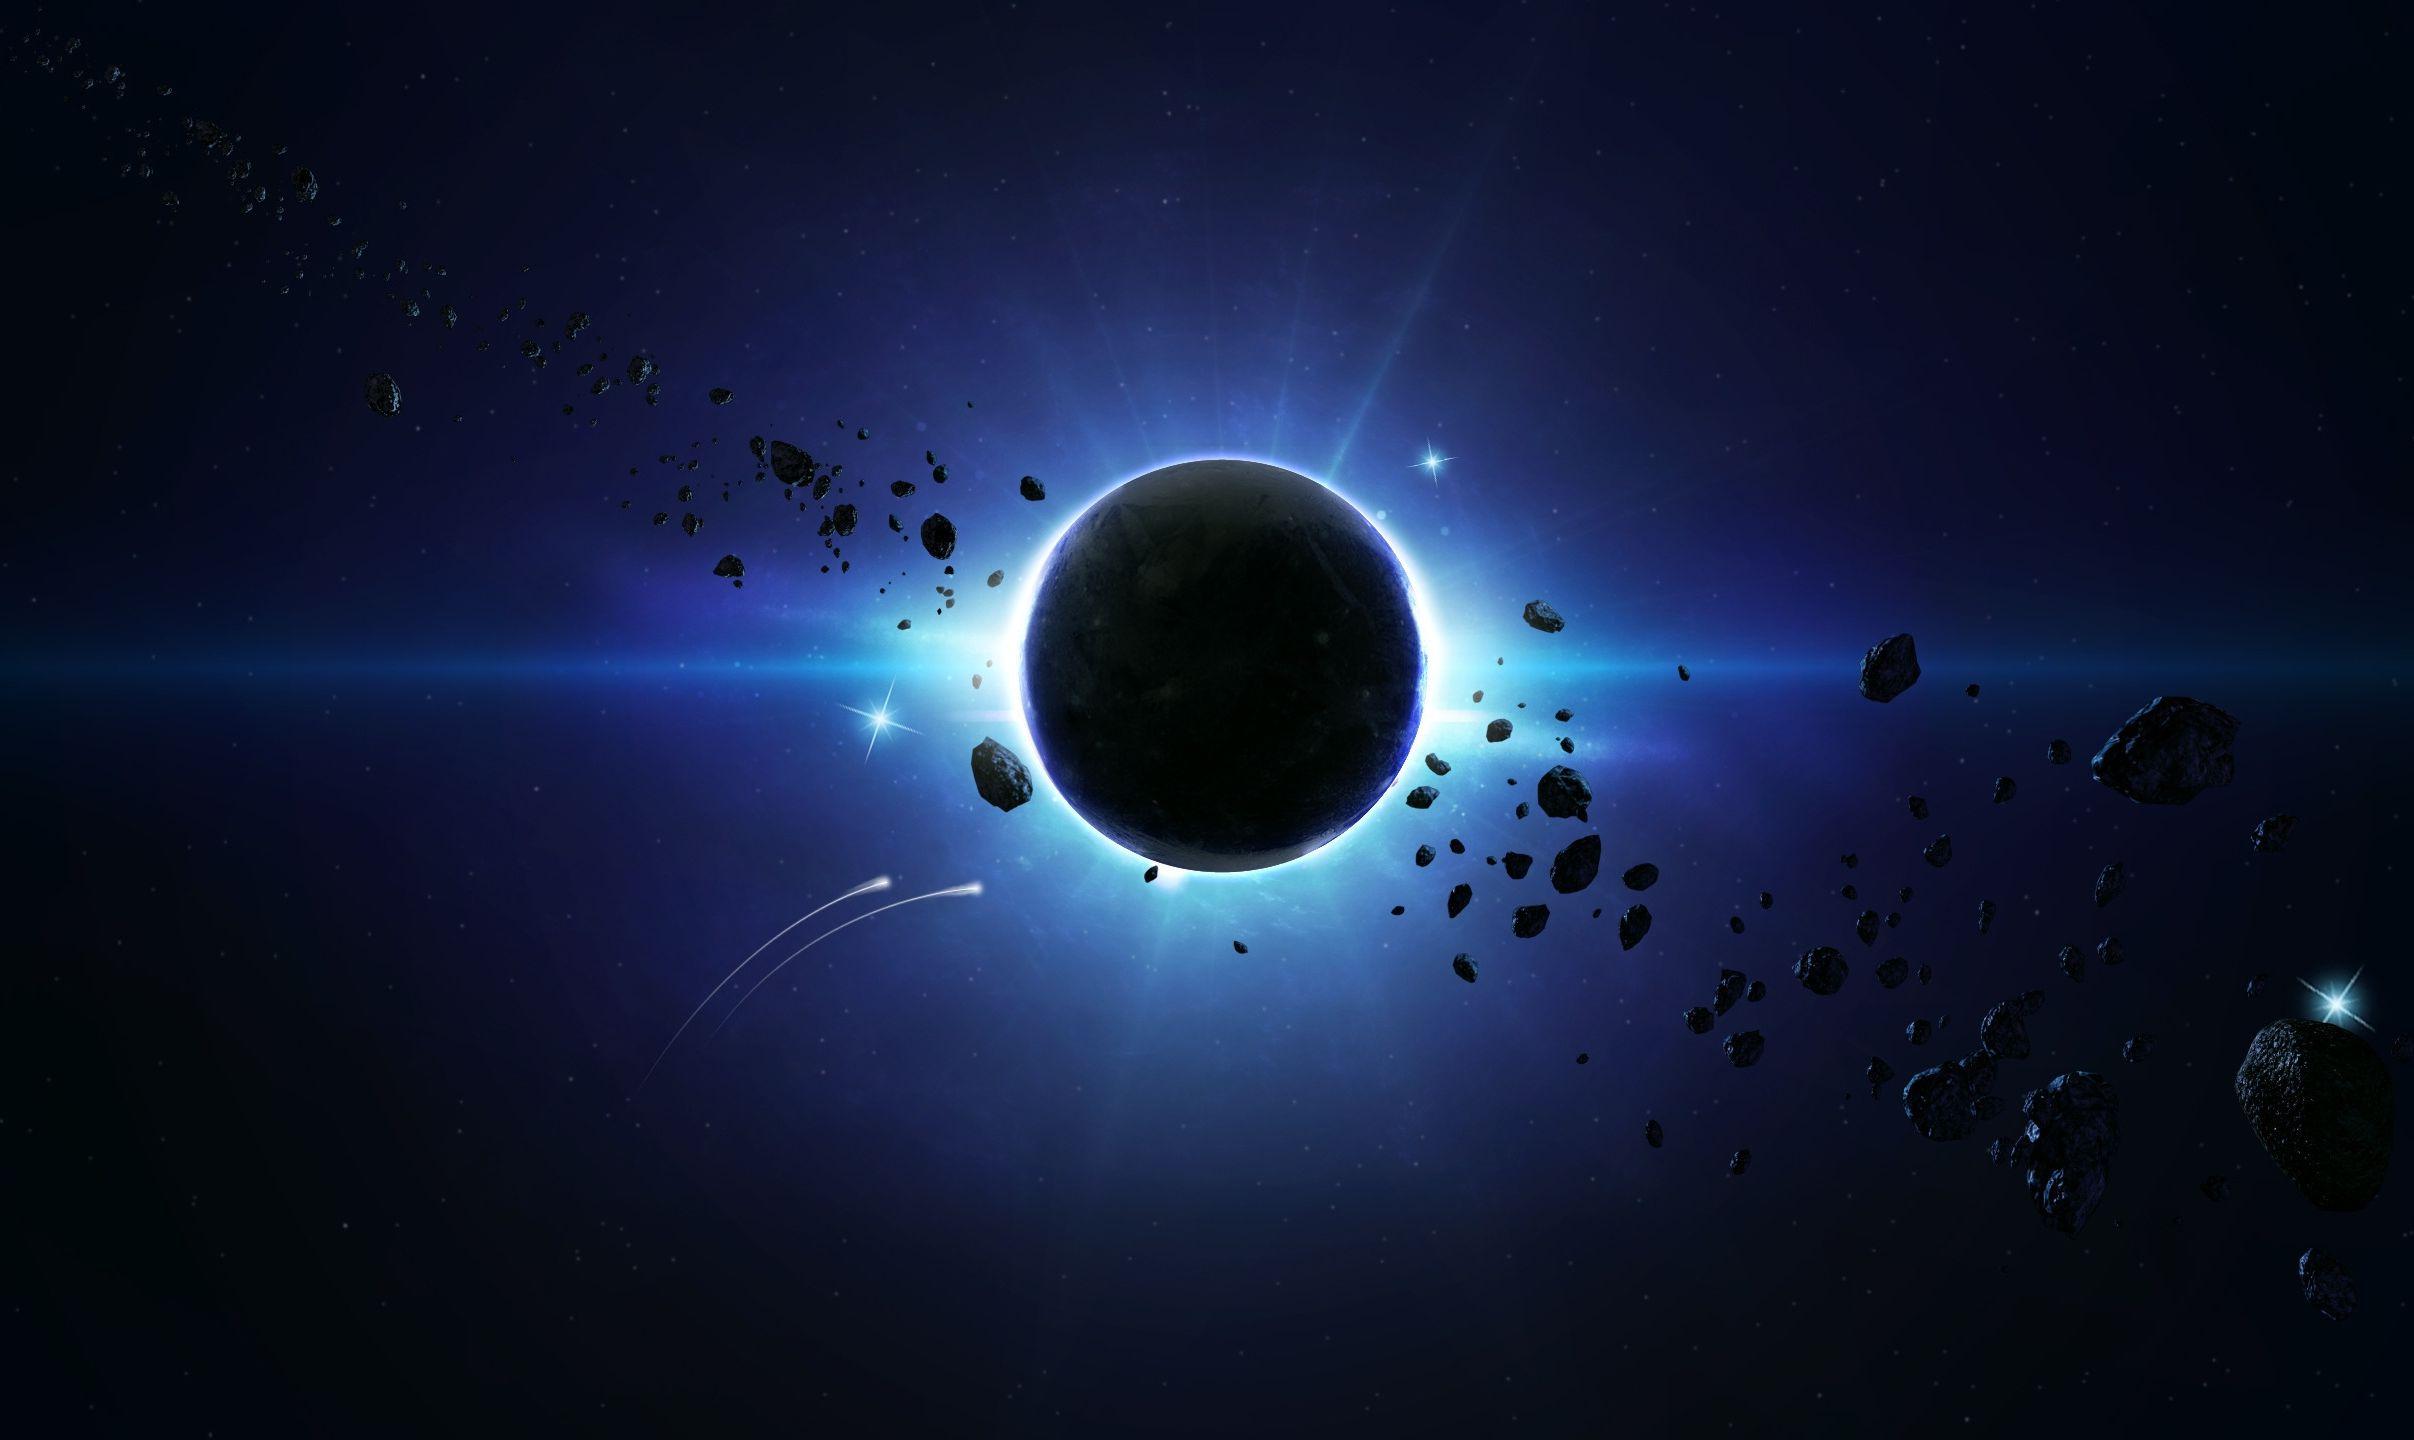 Big Planet Eclipse in the Sky Wallpaper and